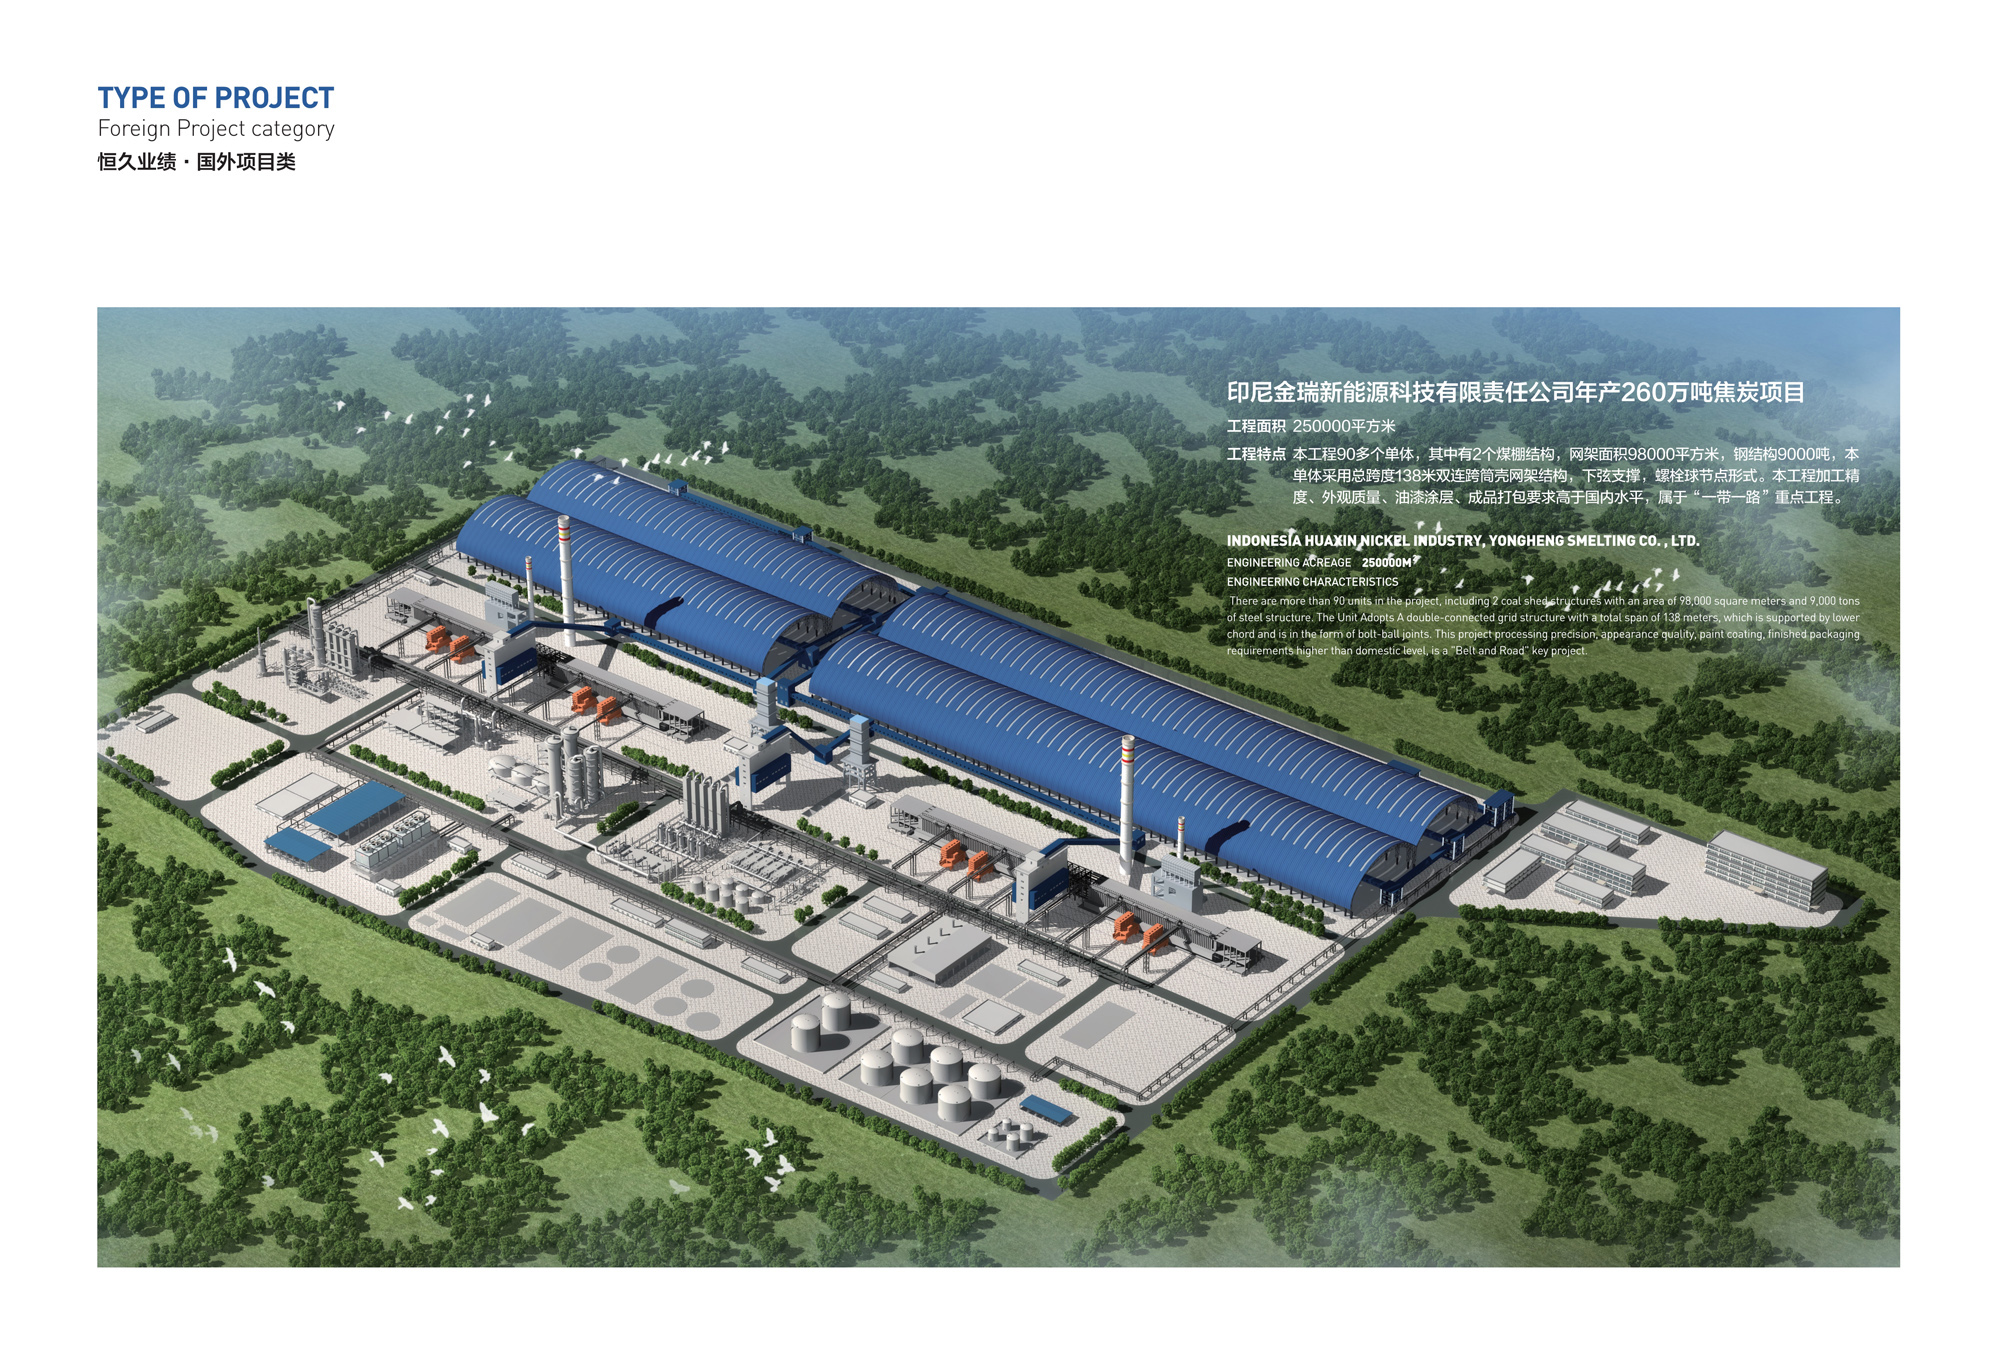 Indonesia Jinrui New Energy Technology Co., Ltd.'s annual production of 2.6 million tons of coke project